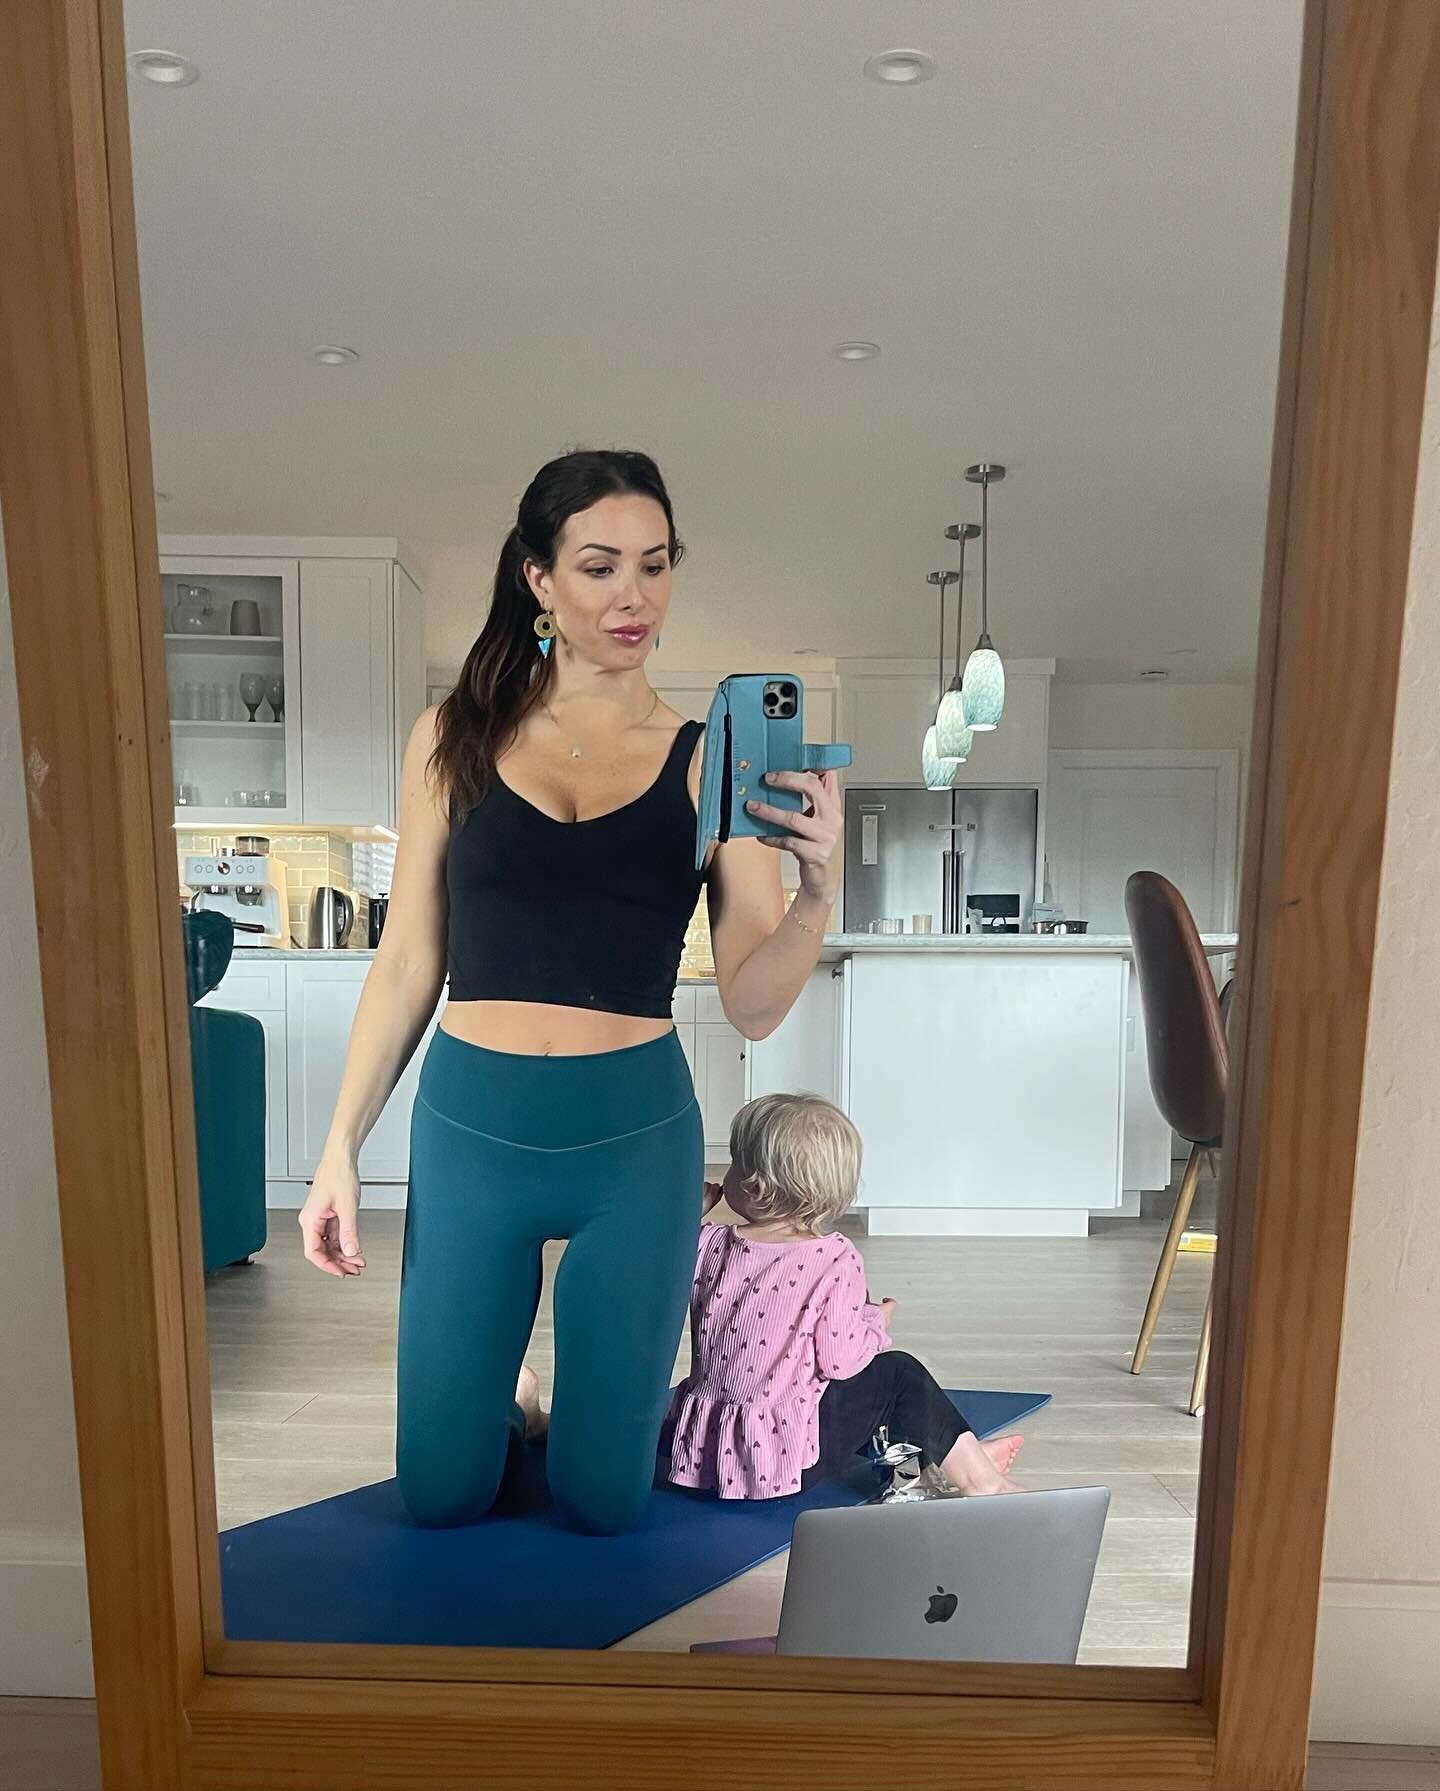 Life lately🦋 

1. New home, back on my Pilates routine strengthening my core after 3 pregnancies, feels really good. I love @bryonydeery for quick and effective 20-30 minute workouts- such a must have for mamas!

2. Moving out of the mold house was 